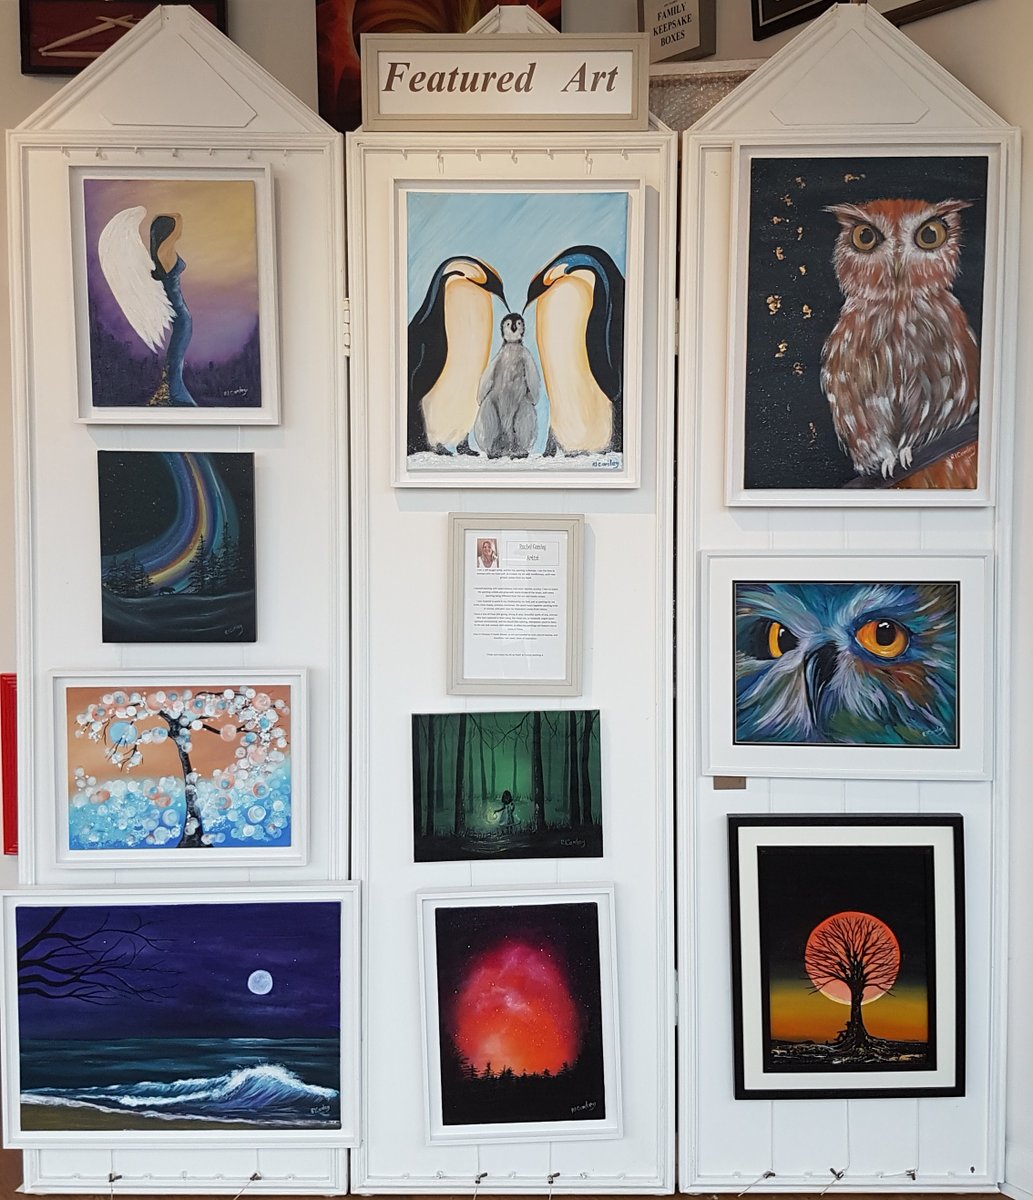 Our Featured Artist For February Is Torquay-based Artist Rachel Comley. She is inspired by nature & her acrylic paintings often feature, trees, the moon, the beach or animals. Pop Into The Gallery To See Her Display In The Flesh @DevonArtistNet @CreativeTorbay @NetworkTorquay